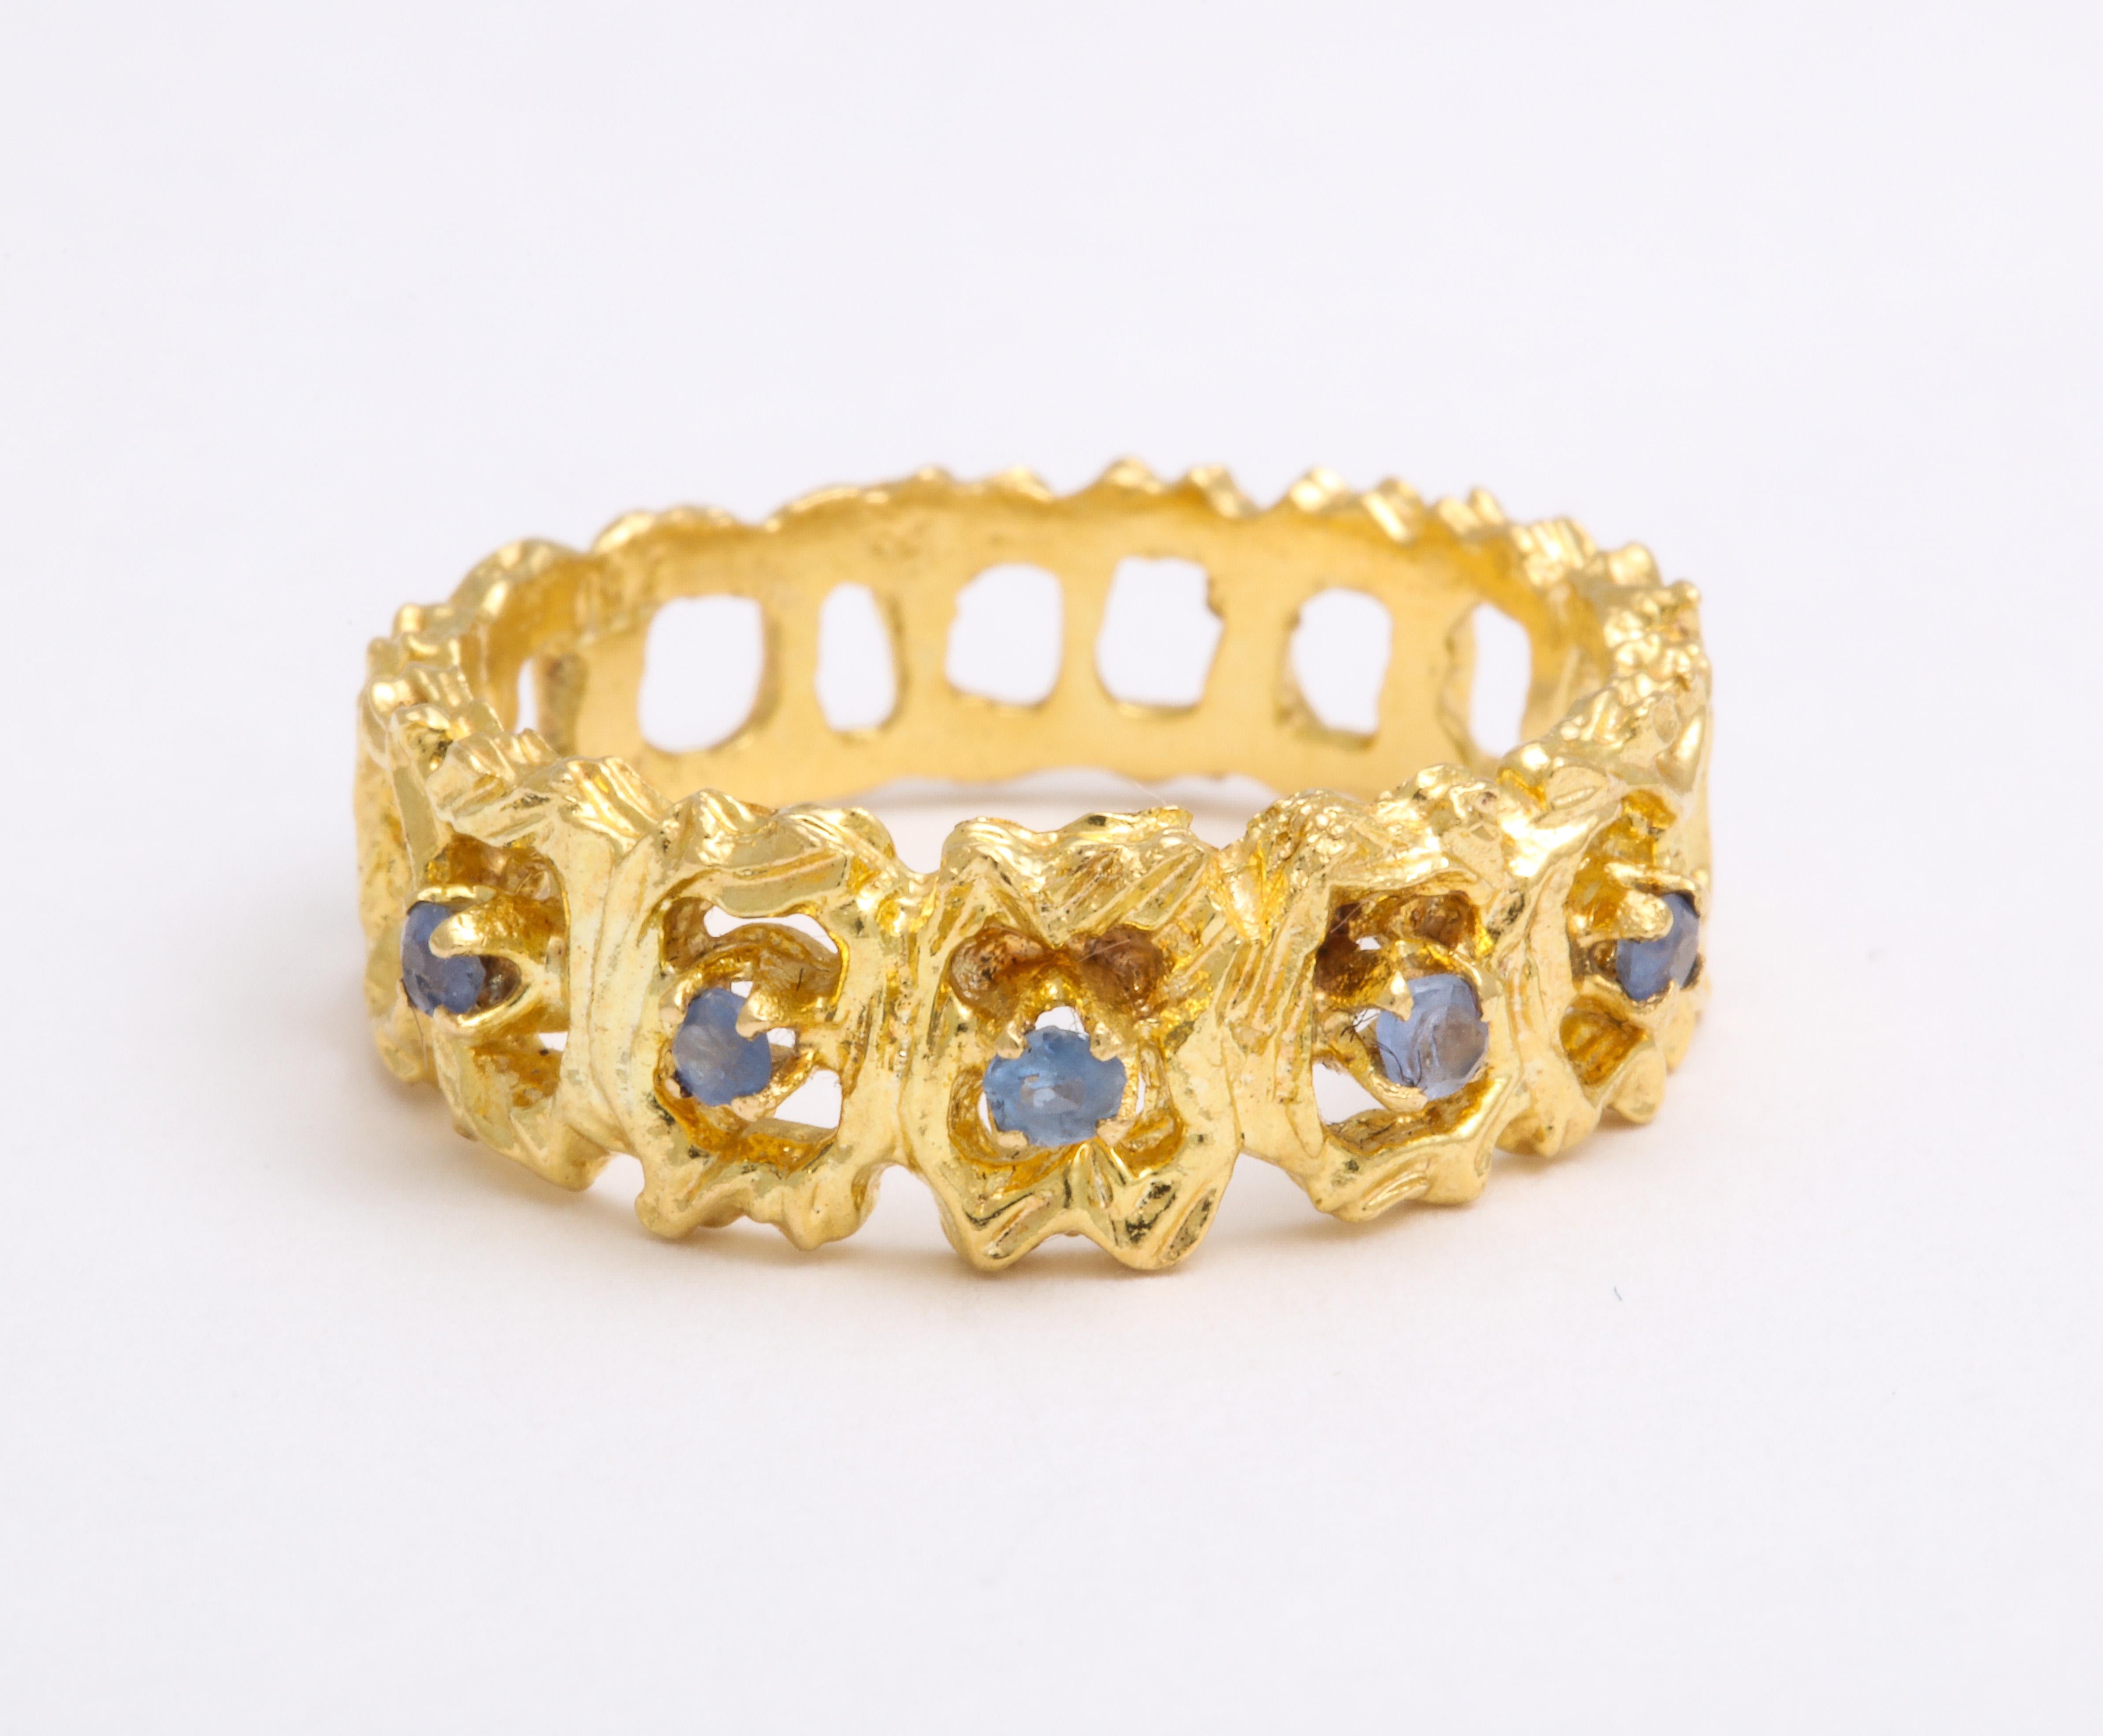 The heavens touch this 18 Kt gold band by setting twinkling blue Ceylon color sapphires around the lacelike face. The sapphires are small stones with few facets, no more than 3.5 points total weight yet their presence is just right for the space